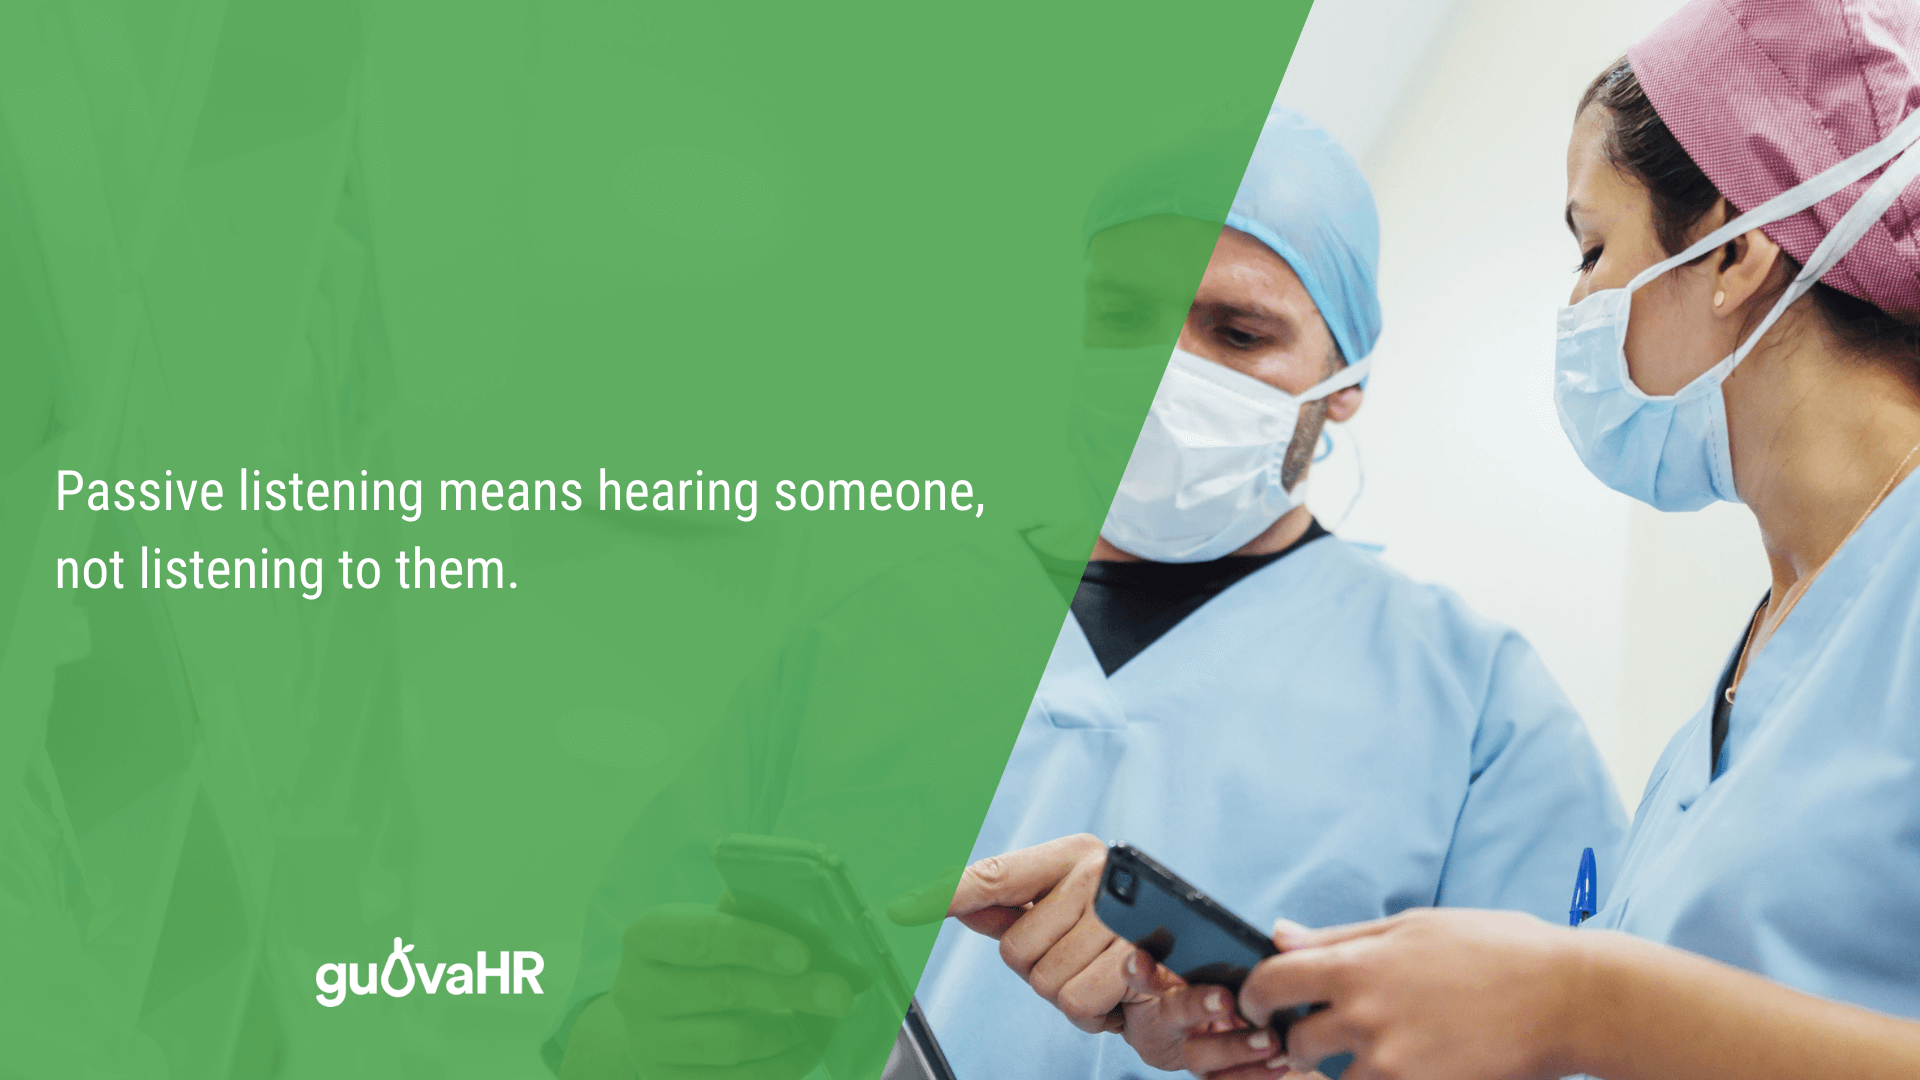 Healthcare workers using smart phones and an internal communication problem quote that says 'Passive listening means hearing someone, not listening to them.'